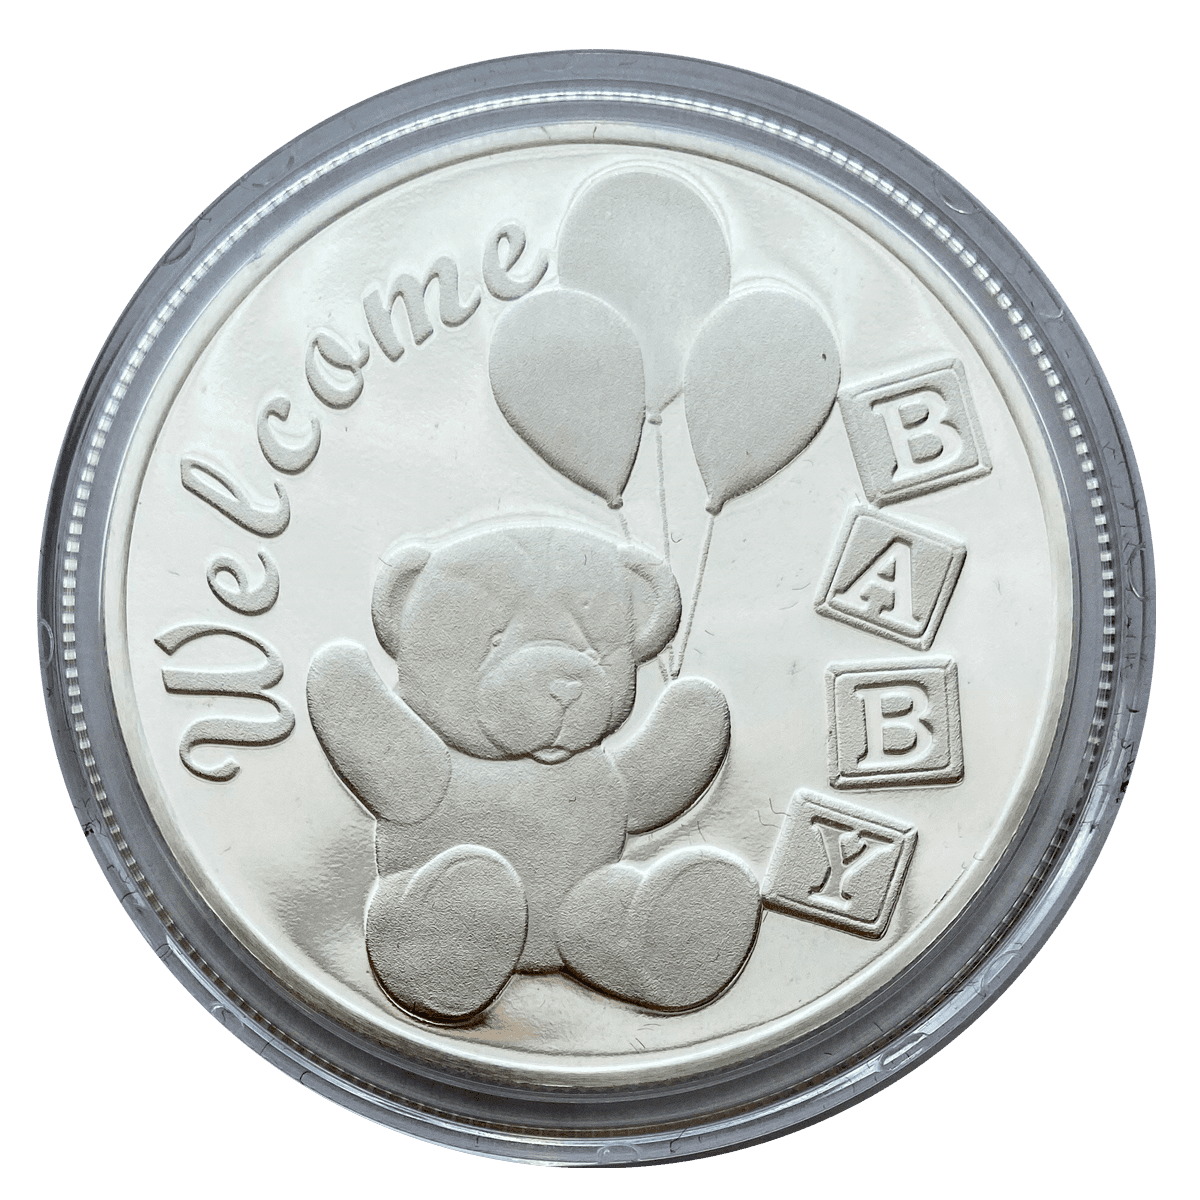 Welcome Baby Commemorative Coin